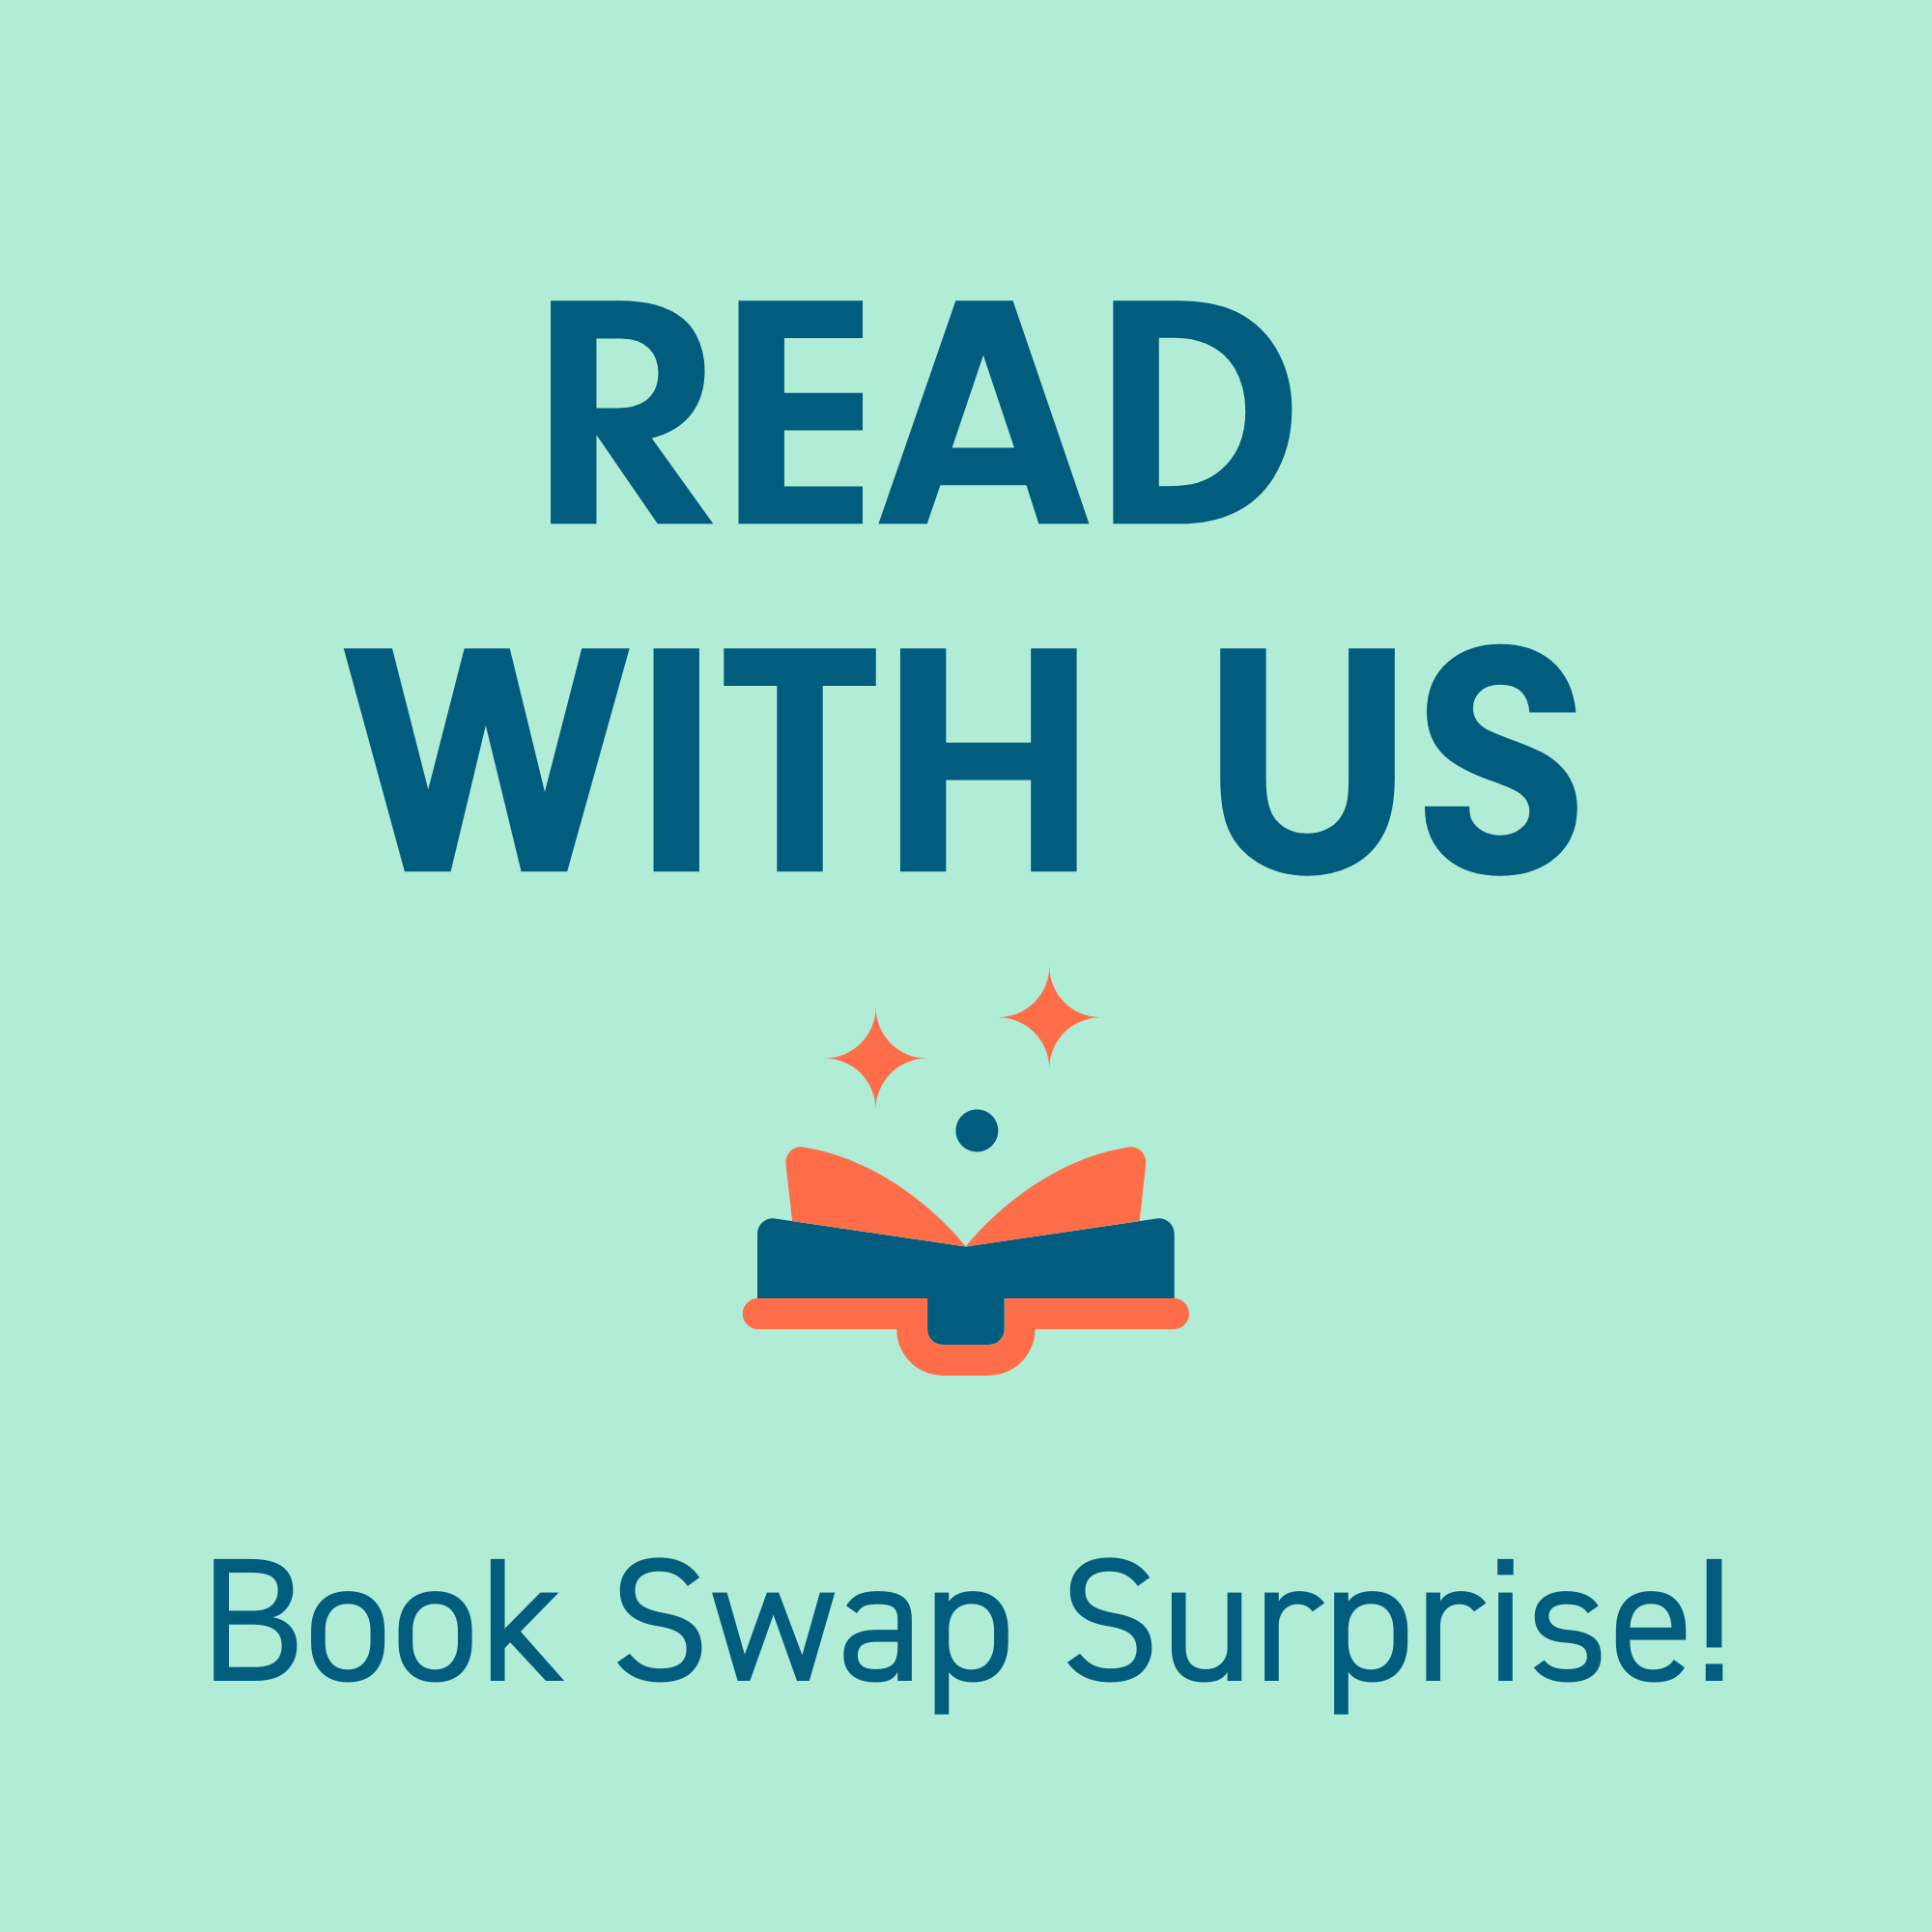 A graphic image on a light blue background with dark blue text that says READ WITH US Book Swap Surprise!